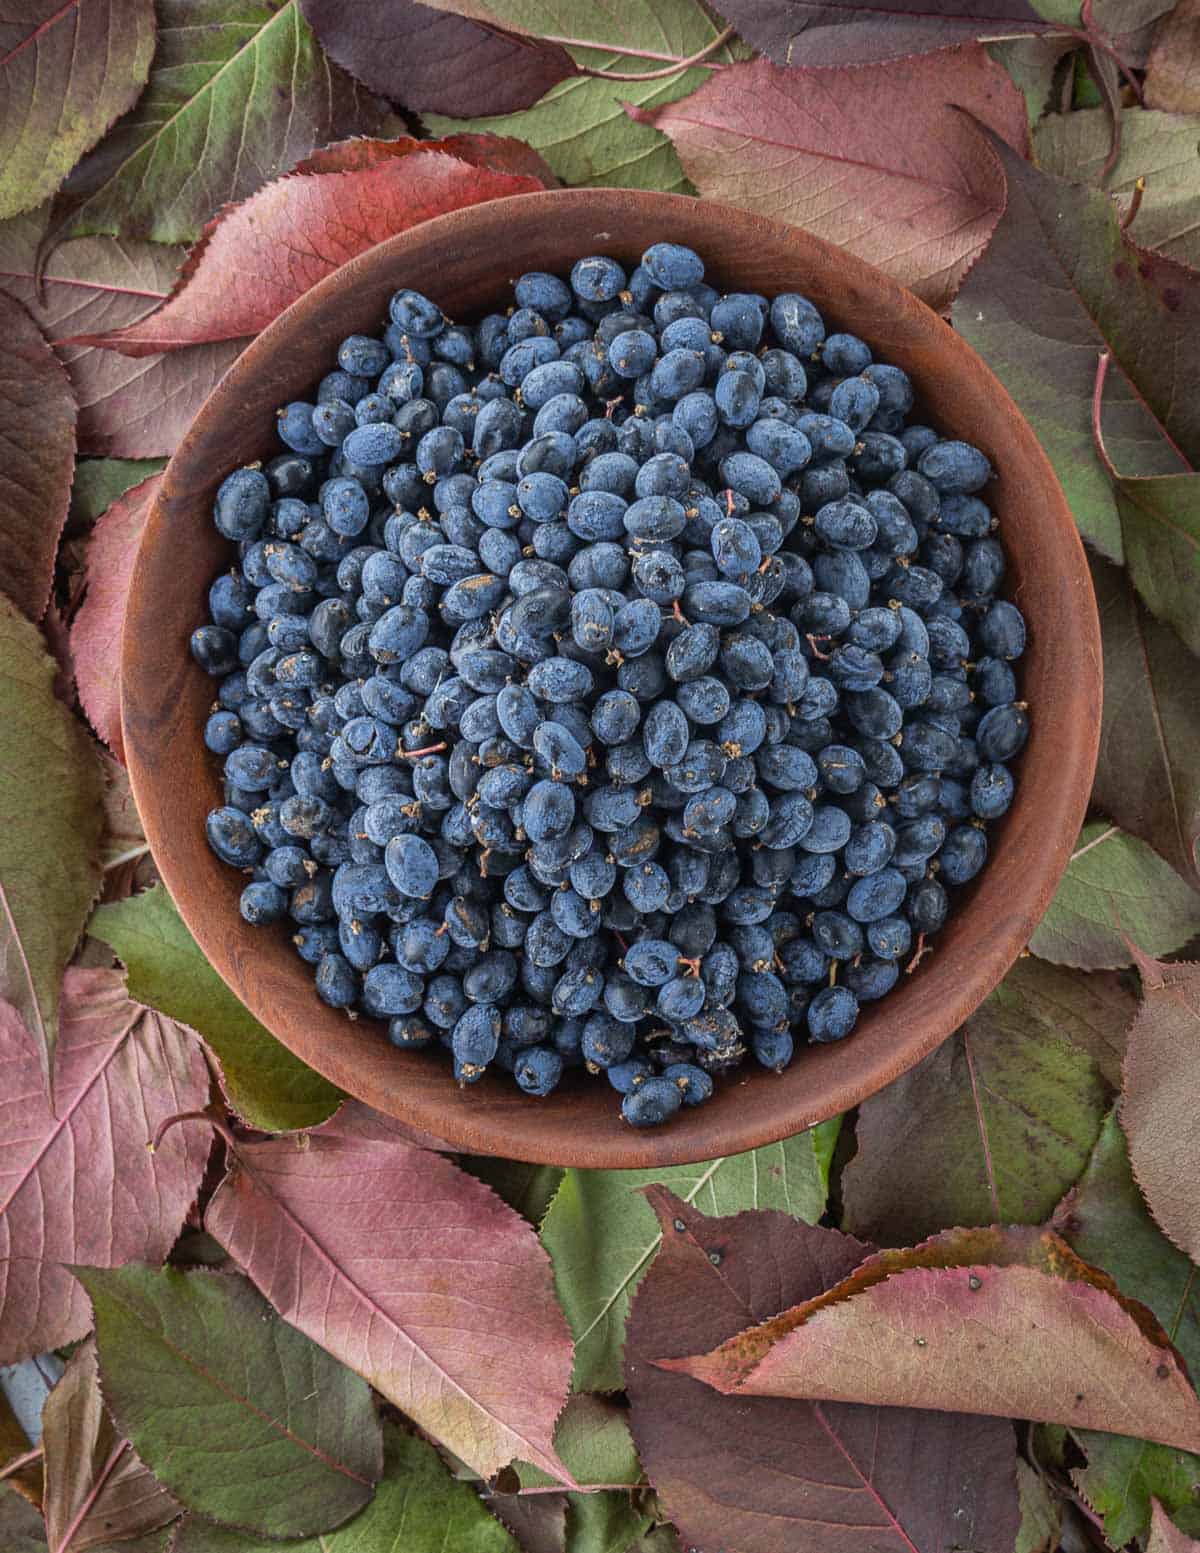 A bowl of fresh nannyberry fruit surrounded by nannyberry leaves of different colors.